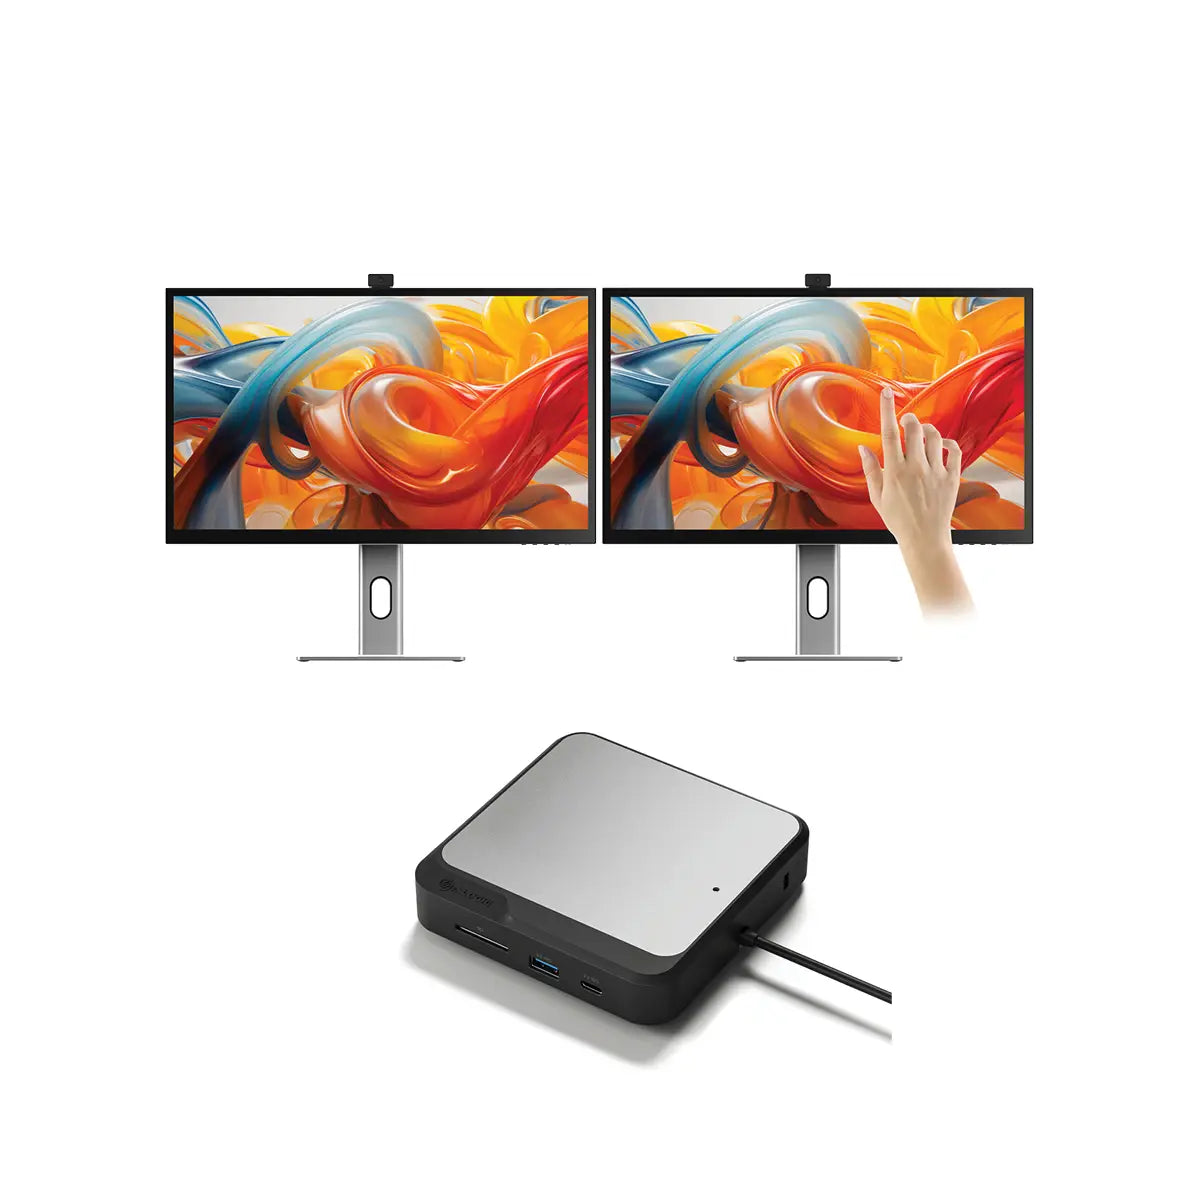 clarity-pro-touch-27-uhd-4k-monitor-with-65w-pd-webcam-and-touchscreen-pack-of-2-dual-4k-universal-docking-station-displayport-edition1